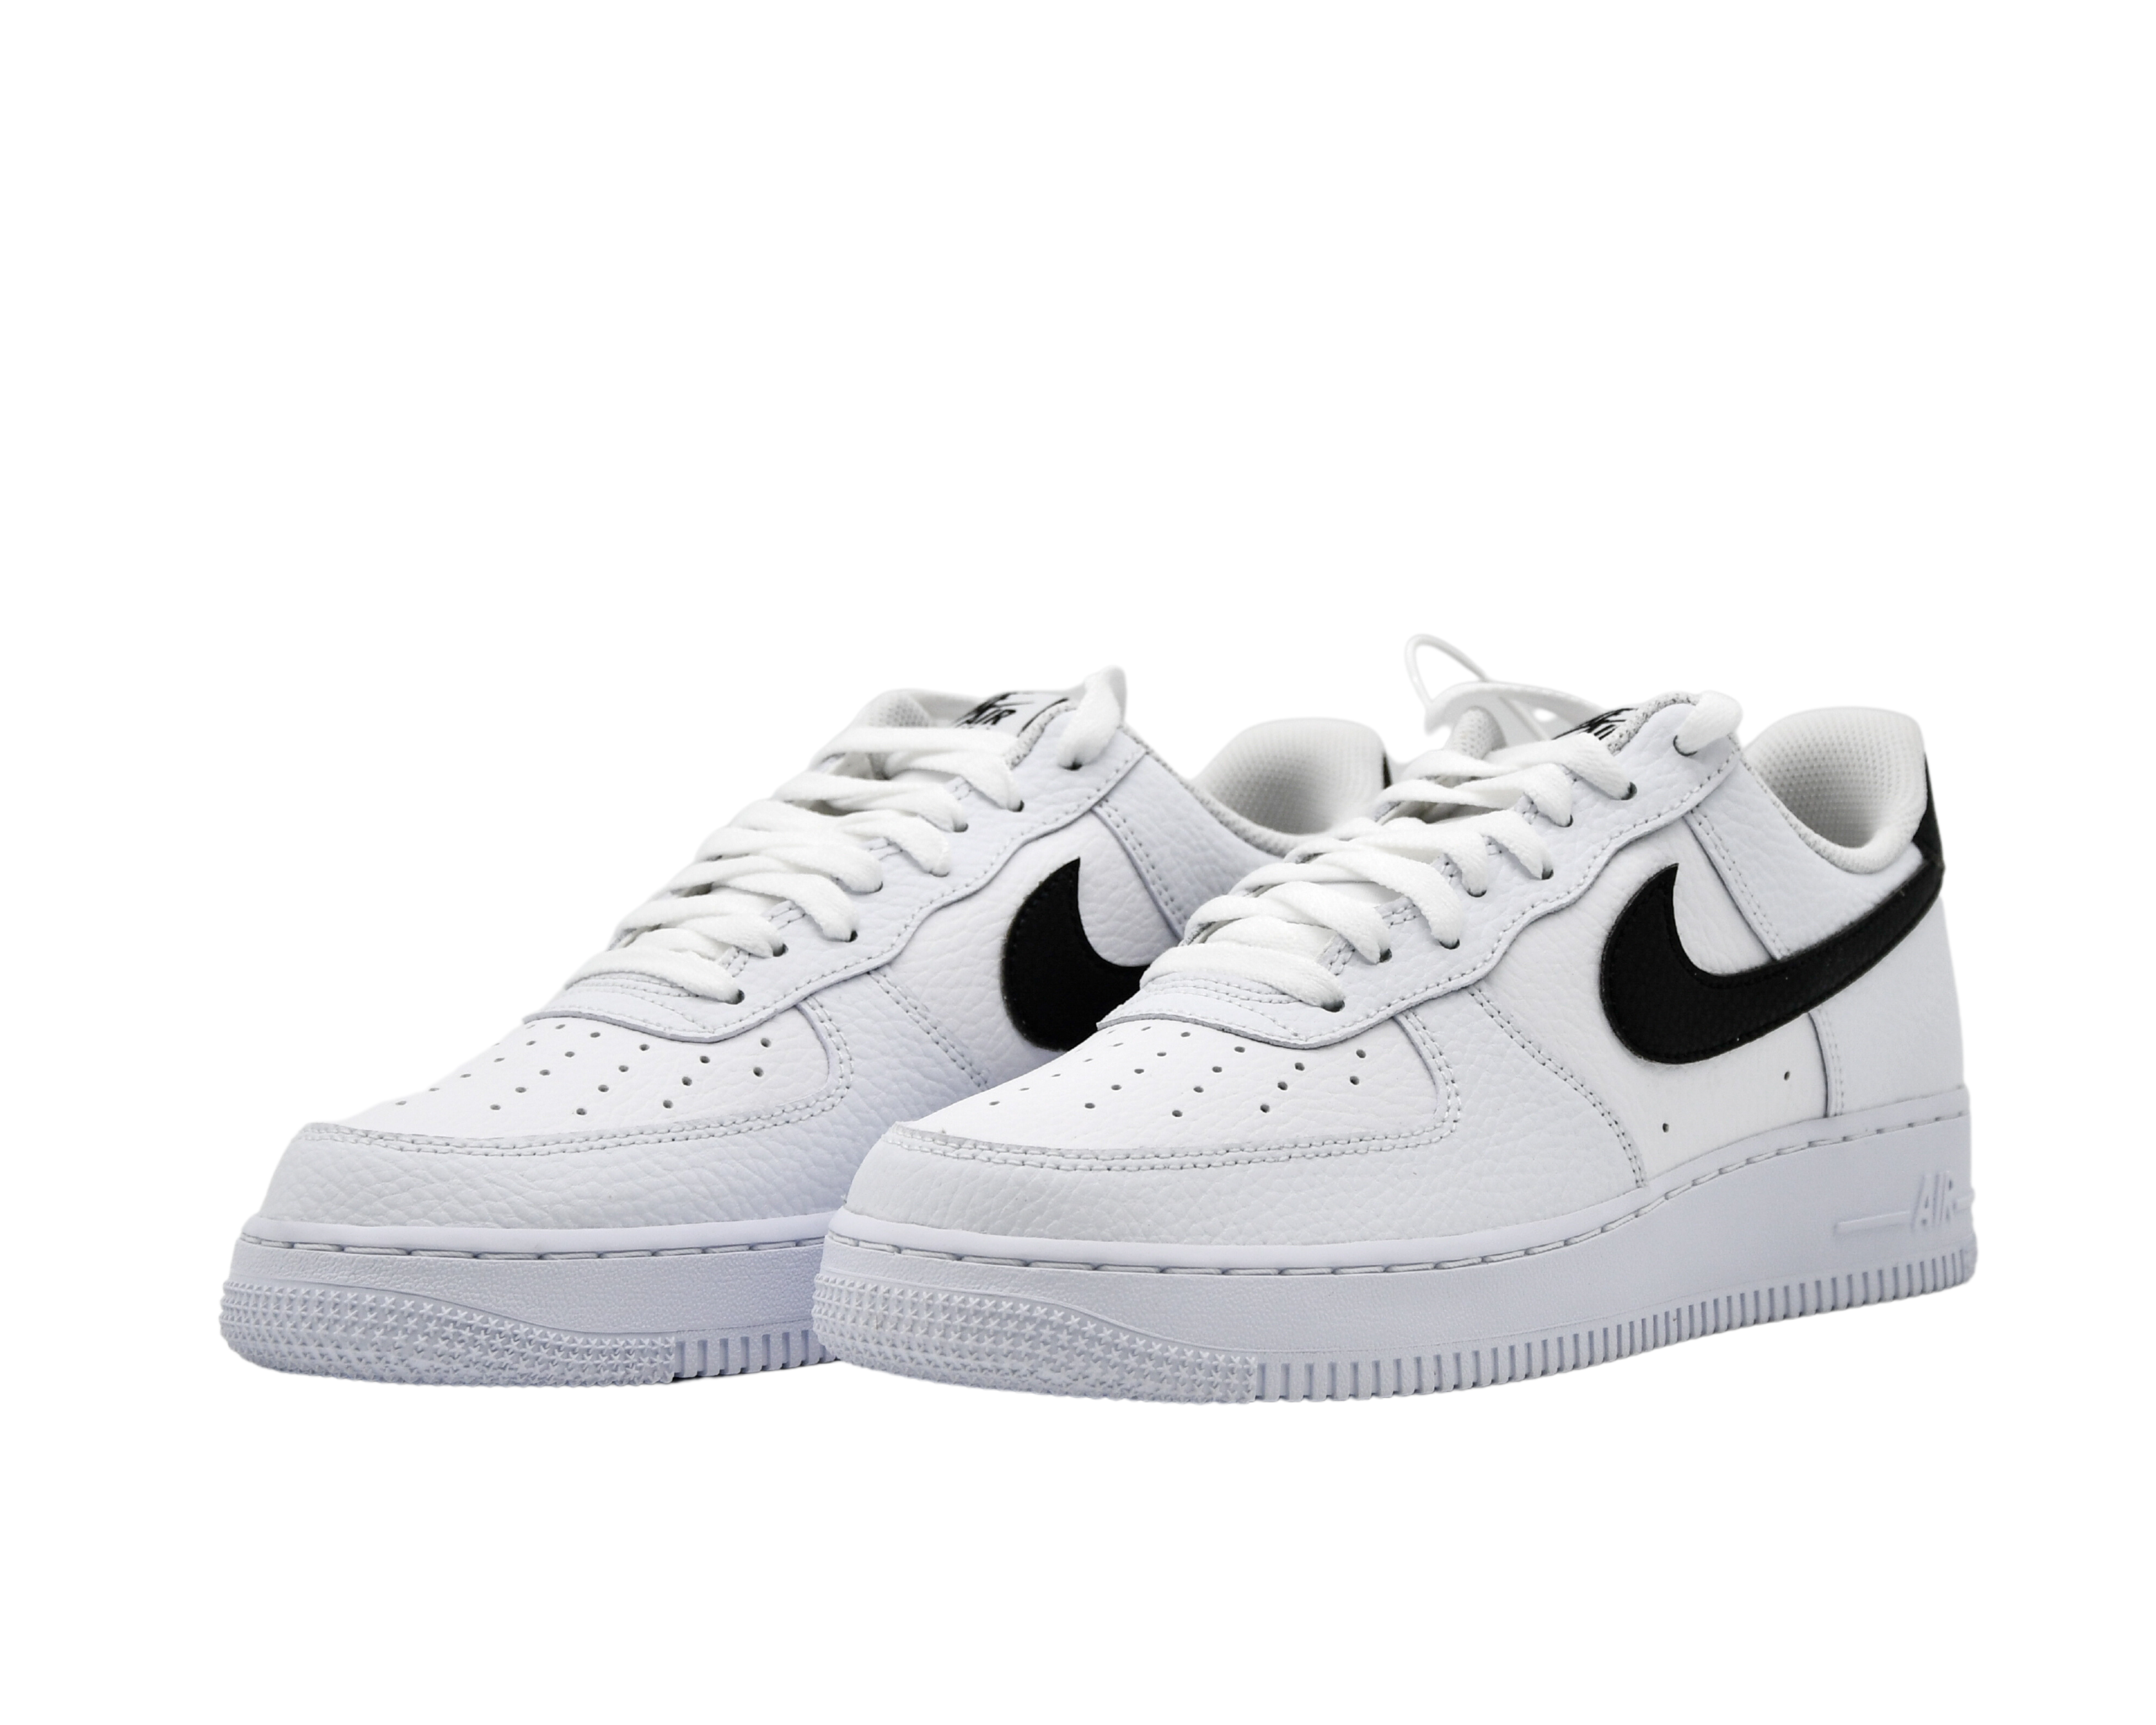 Nike Air Force 1 Low '07 White Black Pebbled Leather